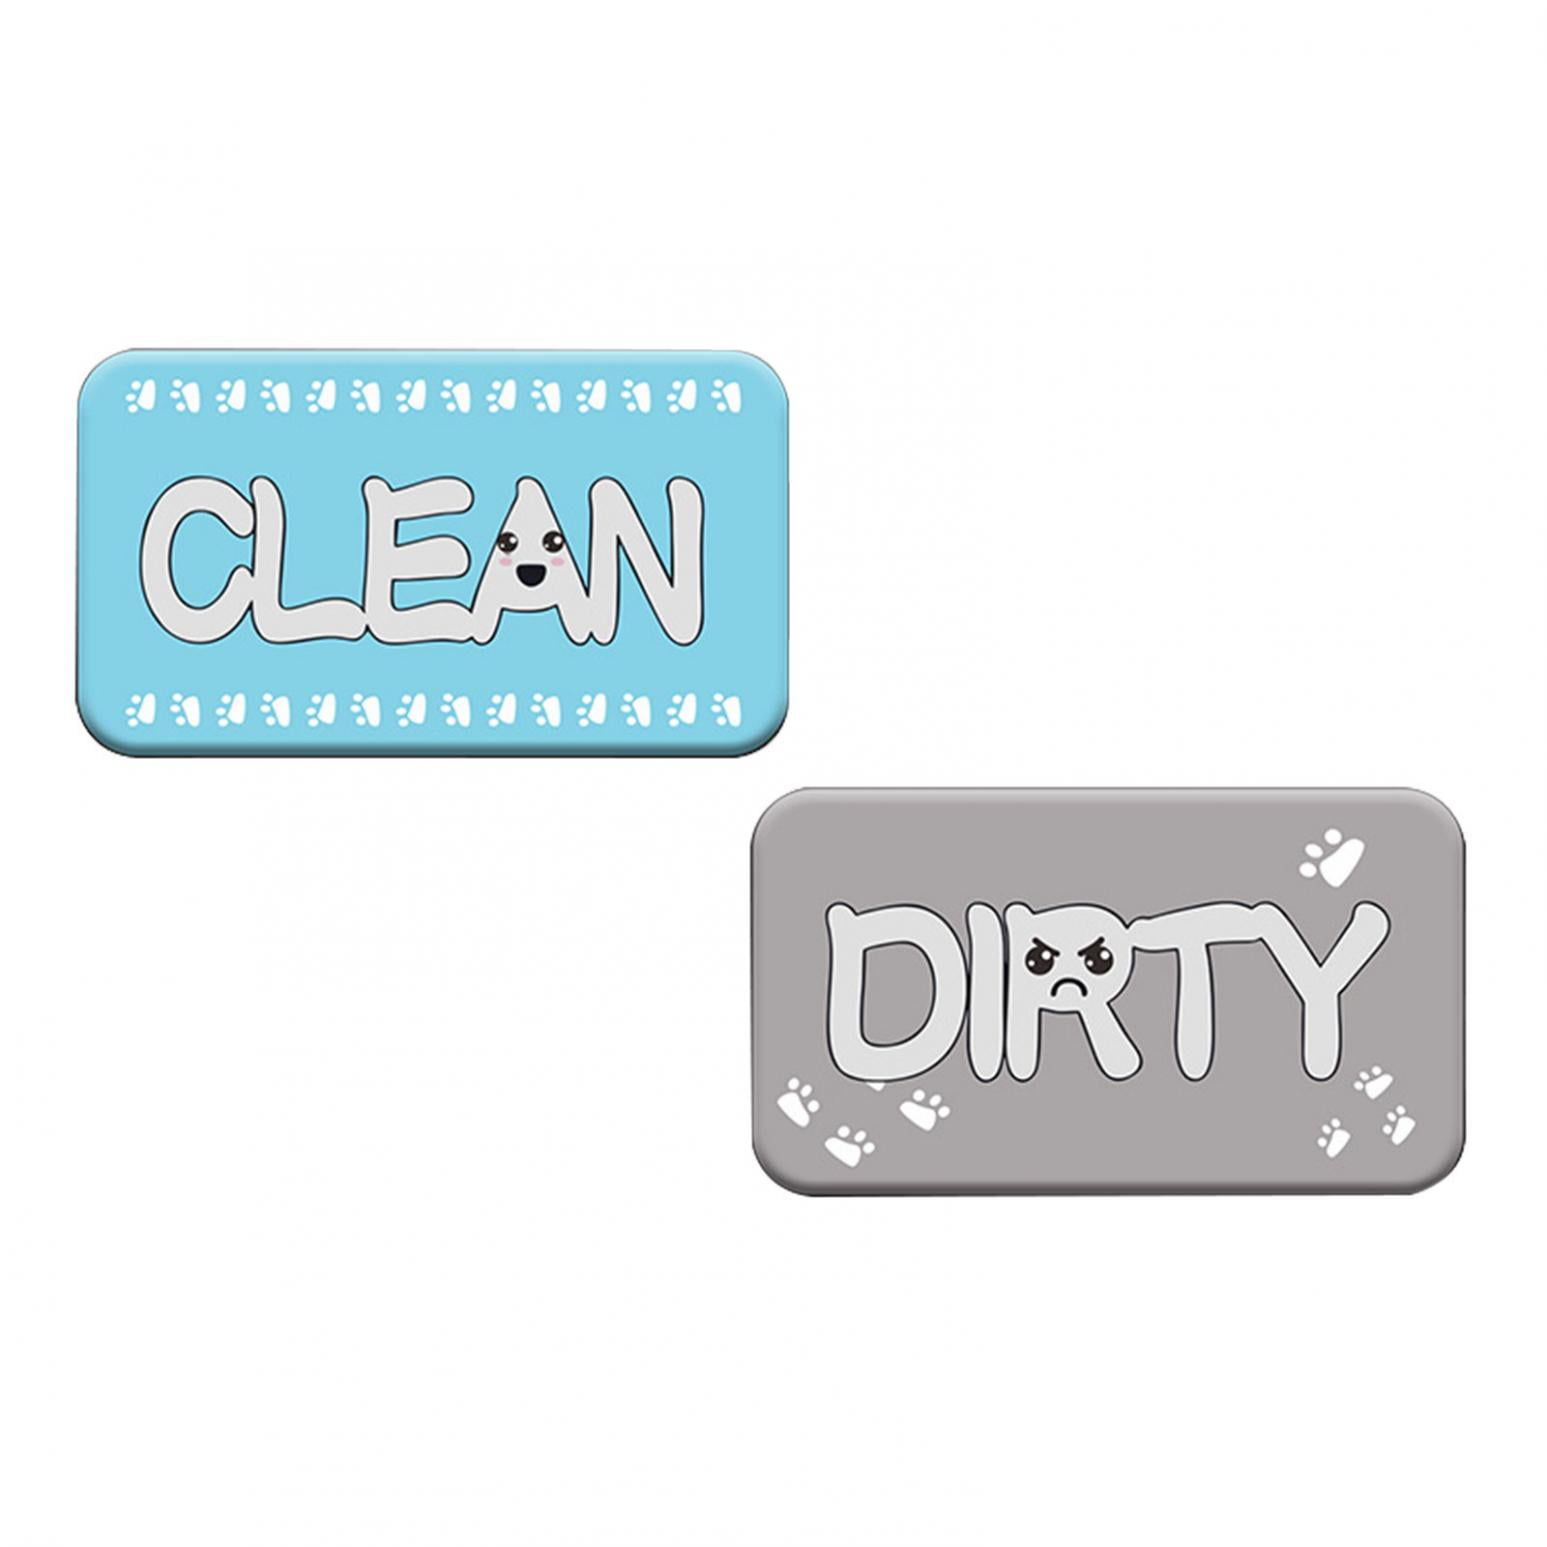 Qisiwole Dirty Clean Dishwasher Magnet,Dishwasher Magnet Clean Dirty Sign for Dishwasher Dish Bin That Says Clean or Dirty Dish Washer Refrigerator